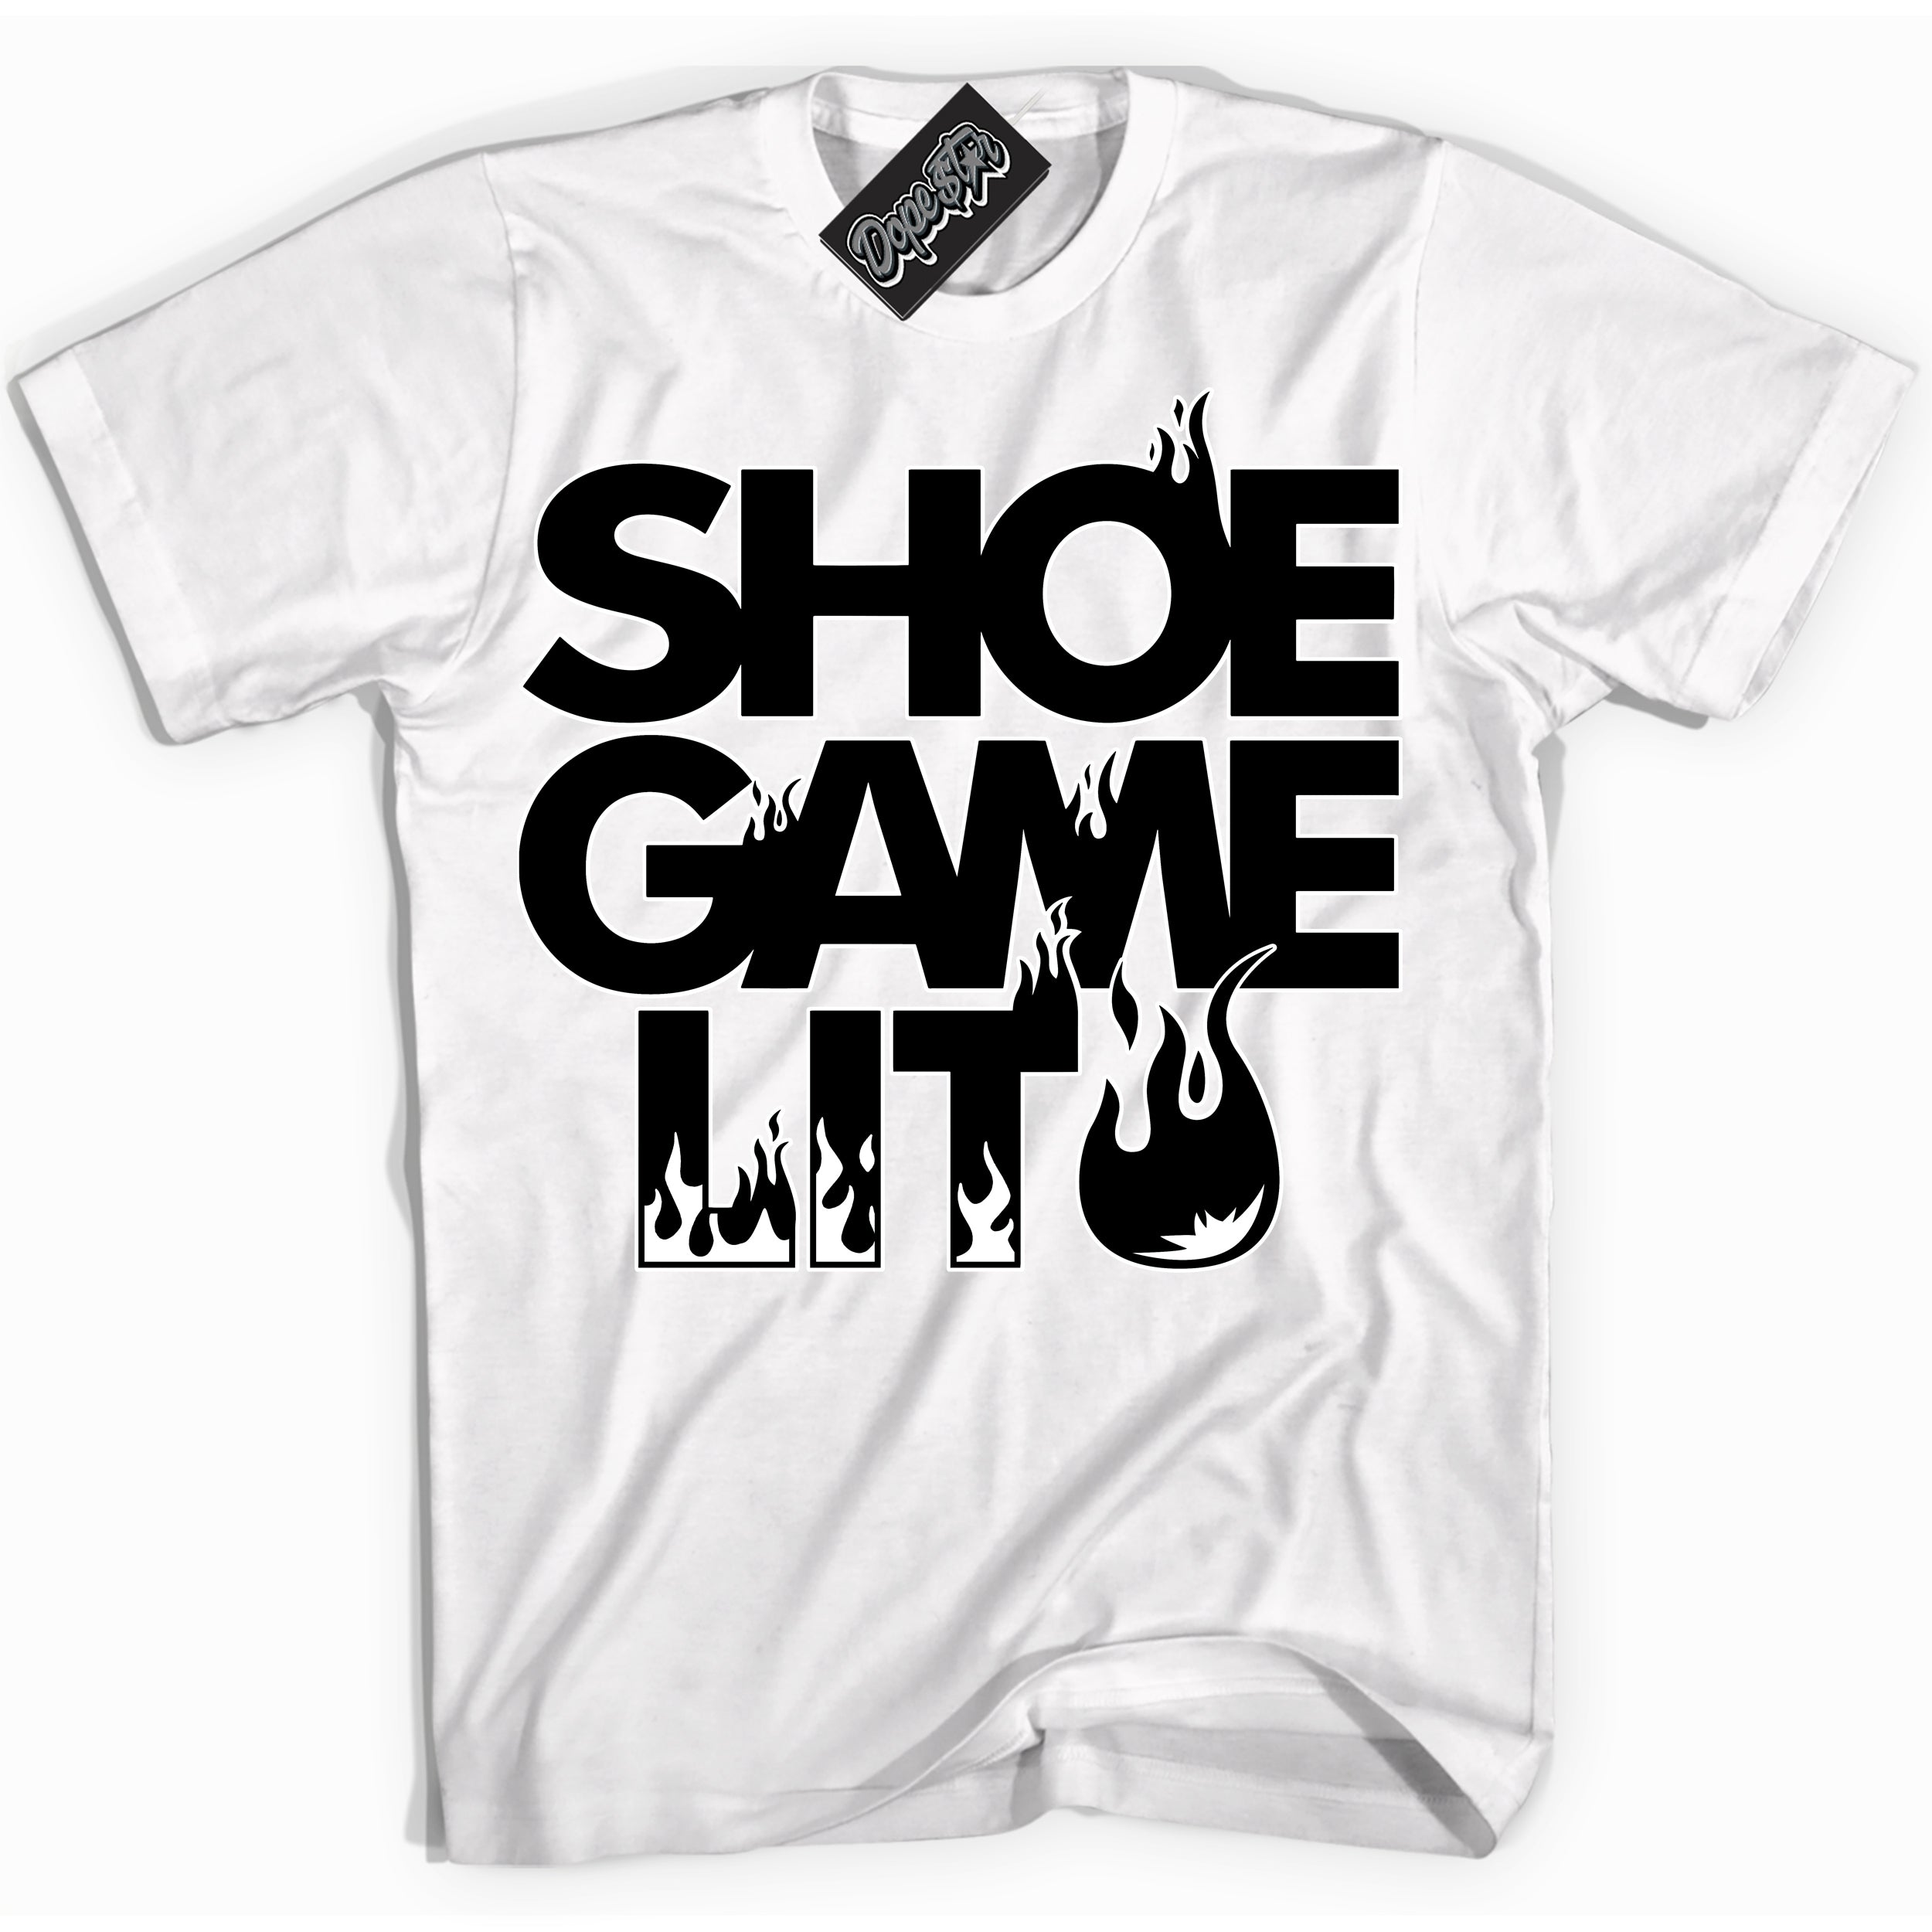 Cool White Shirt with “ Shoe Game Lit ” design that perfectly matches '85 Black White 1s Sneakers.